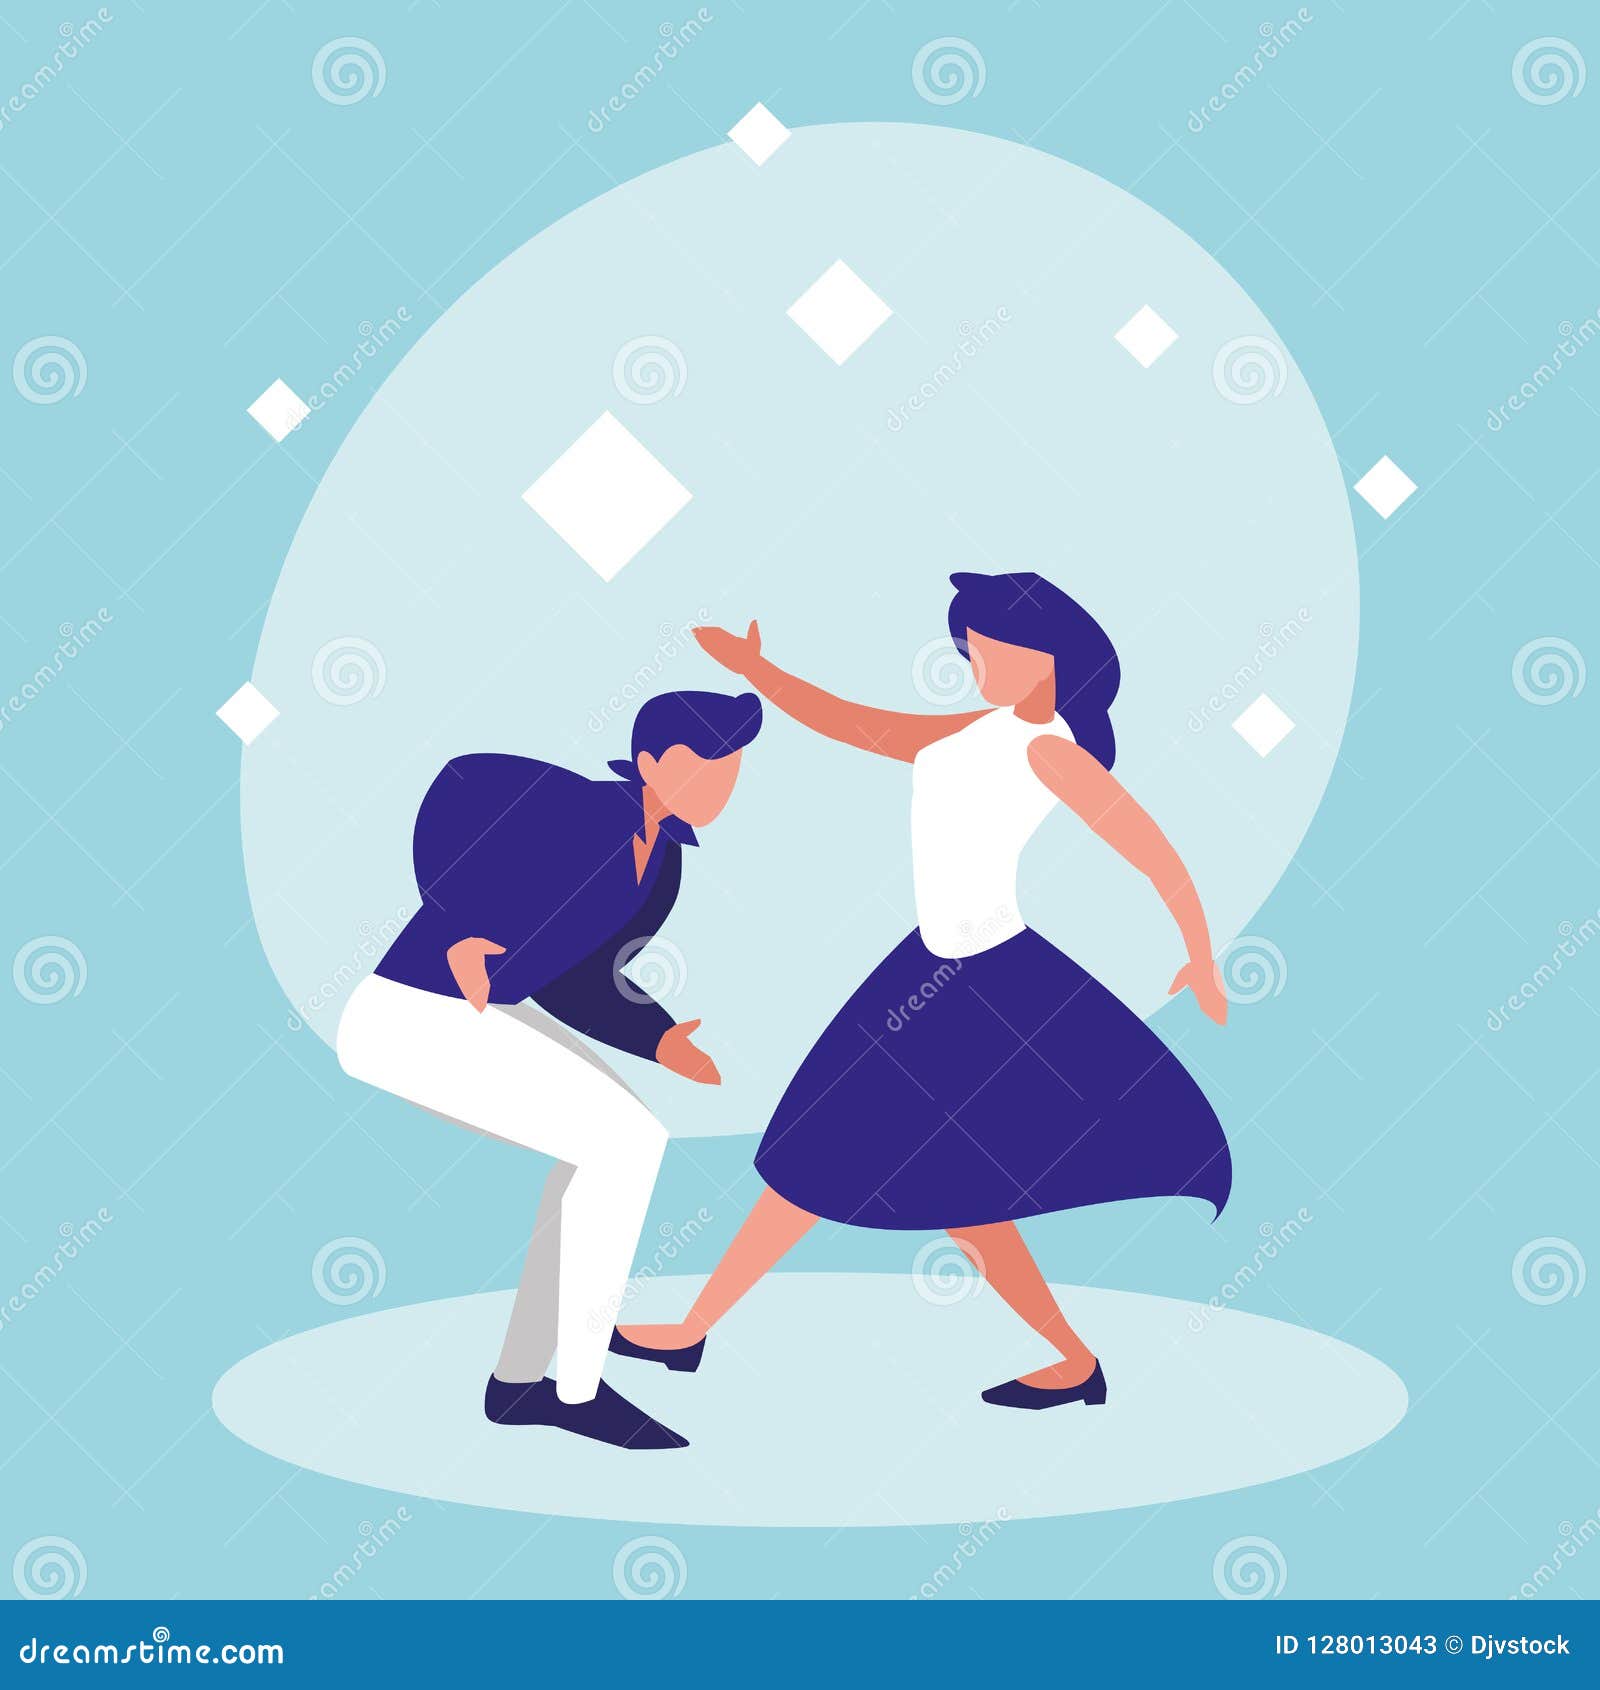 Couple Dance of Disco Avatar Character Stock Vector - Illustration of ...